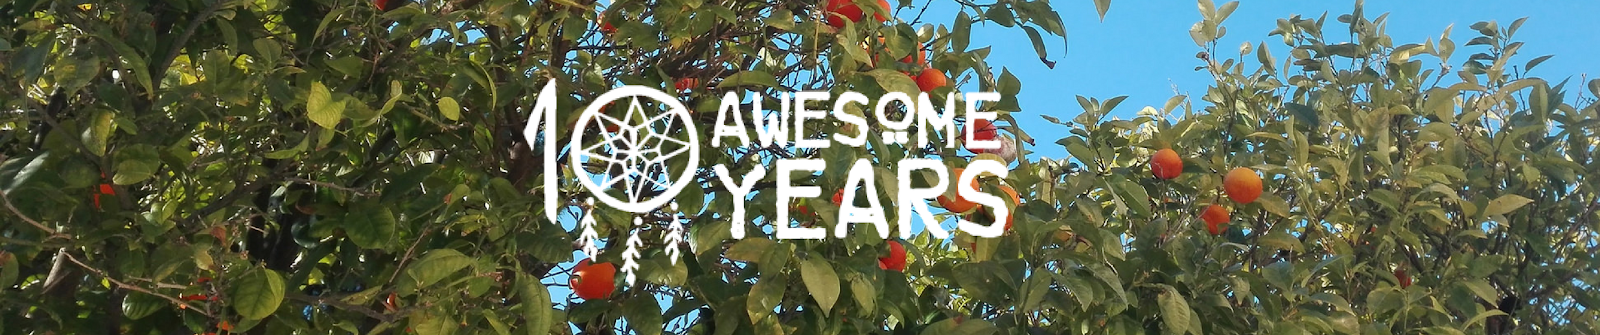 Ten Awesome Years